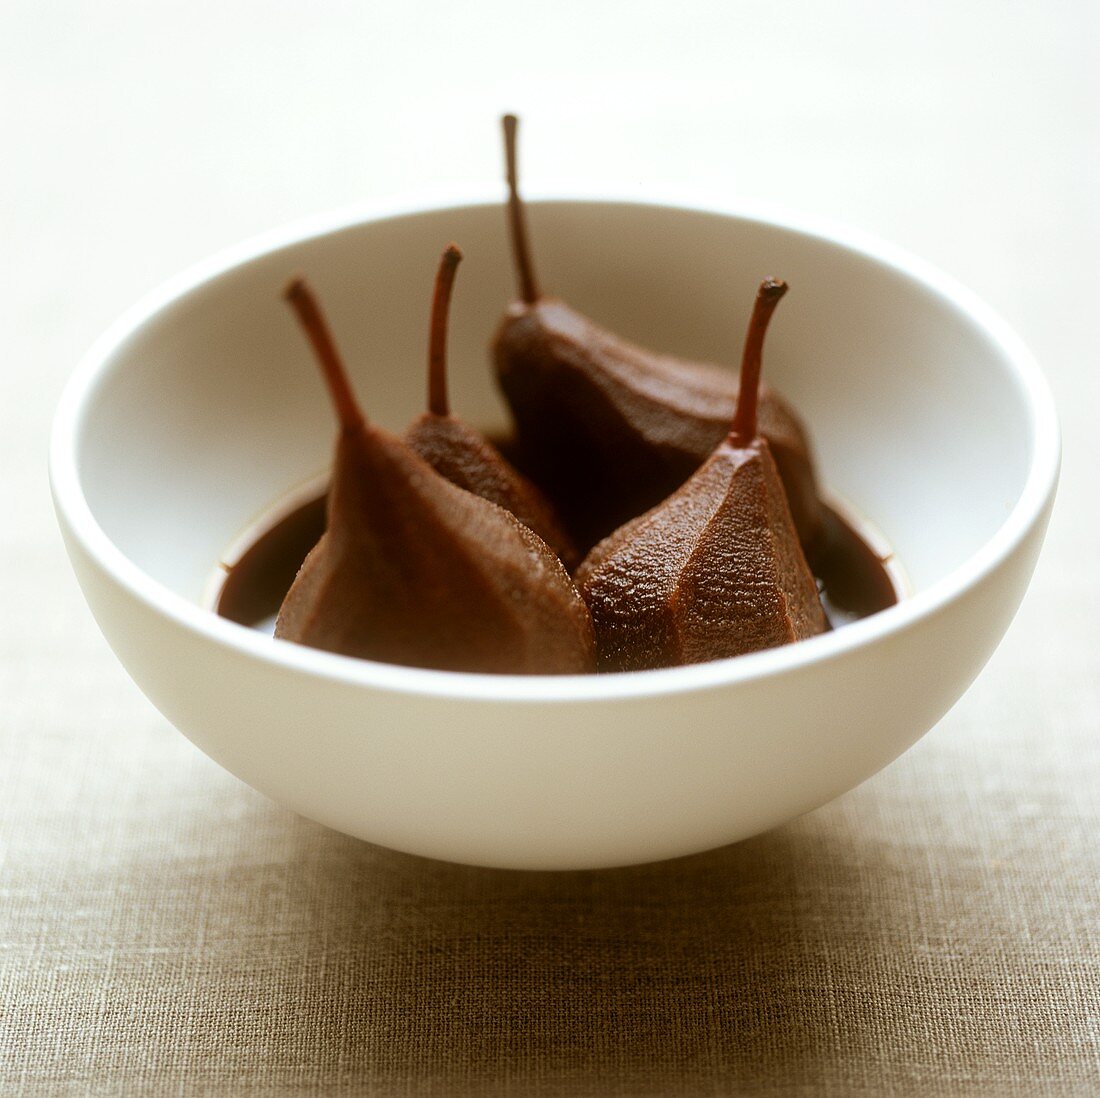 Chocolate pears in a bowl